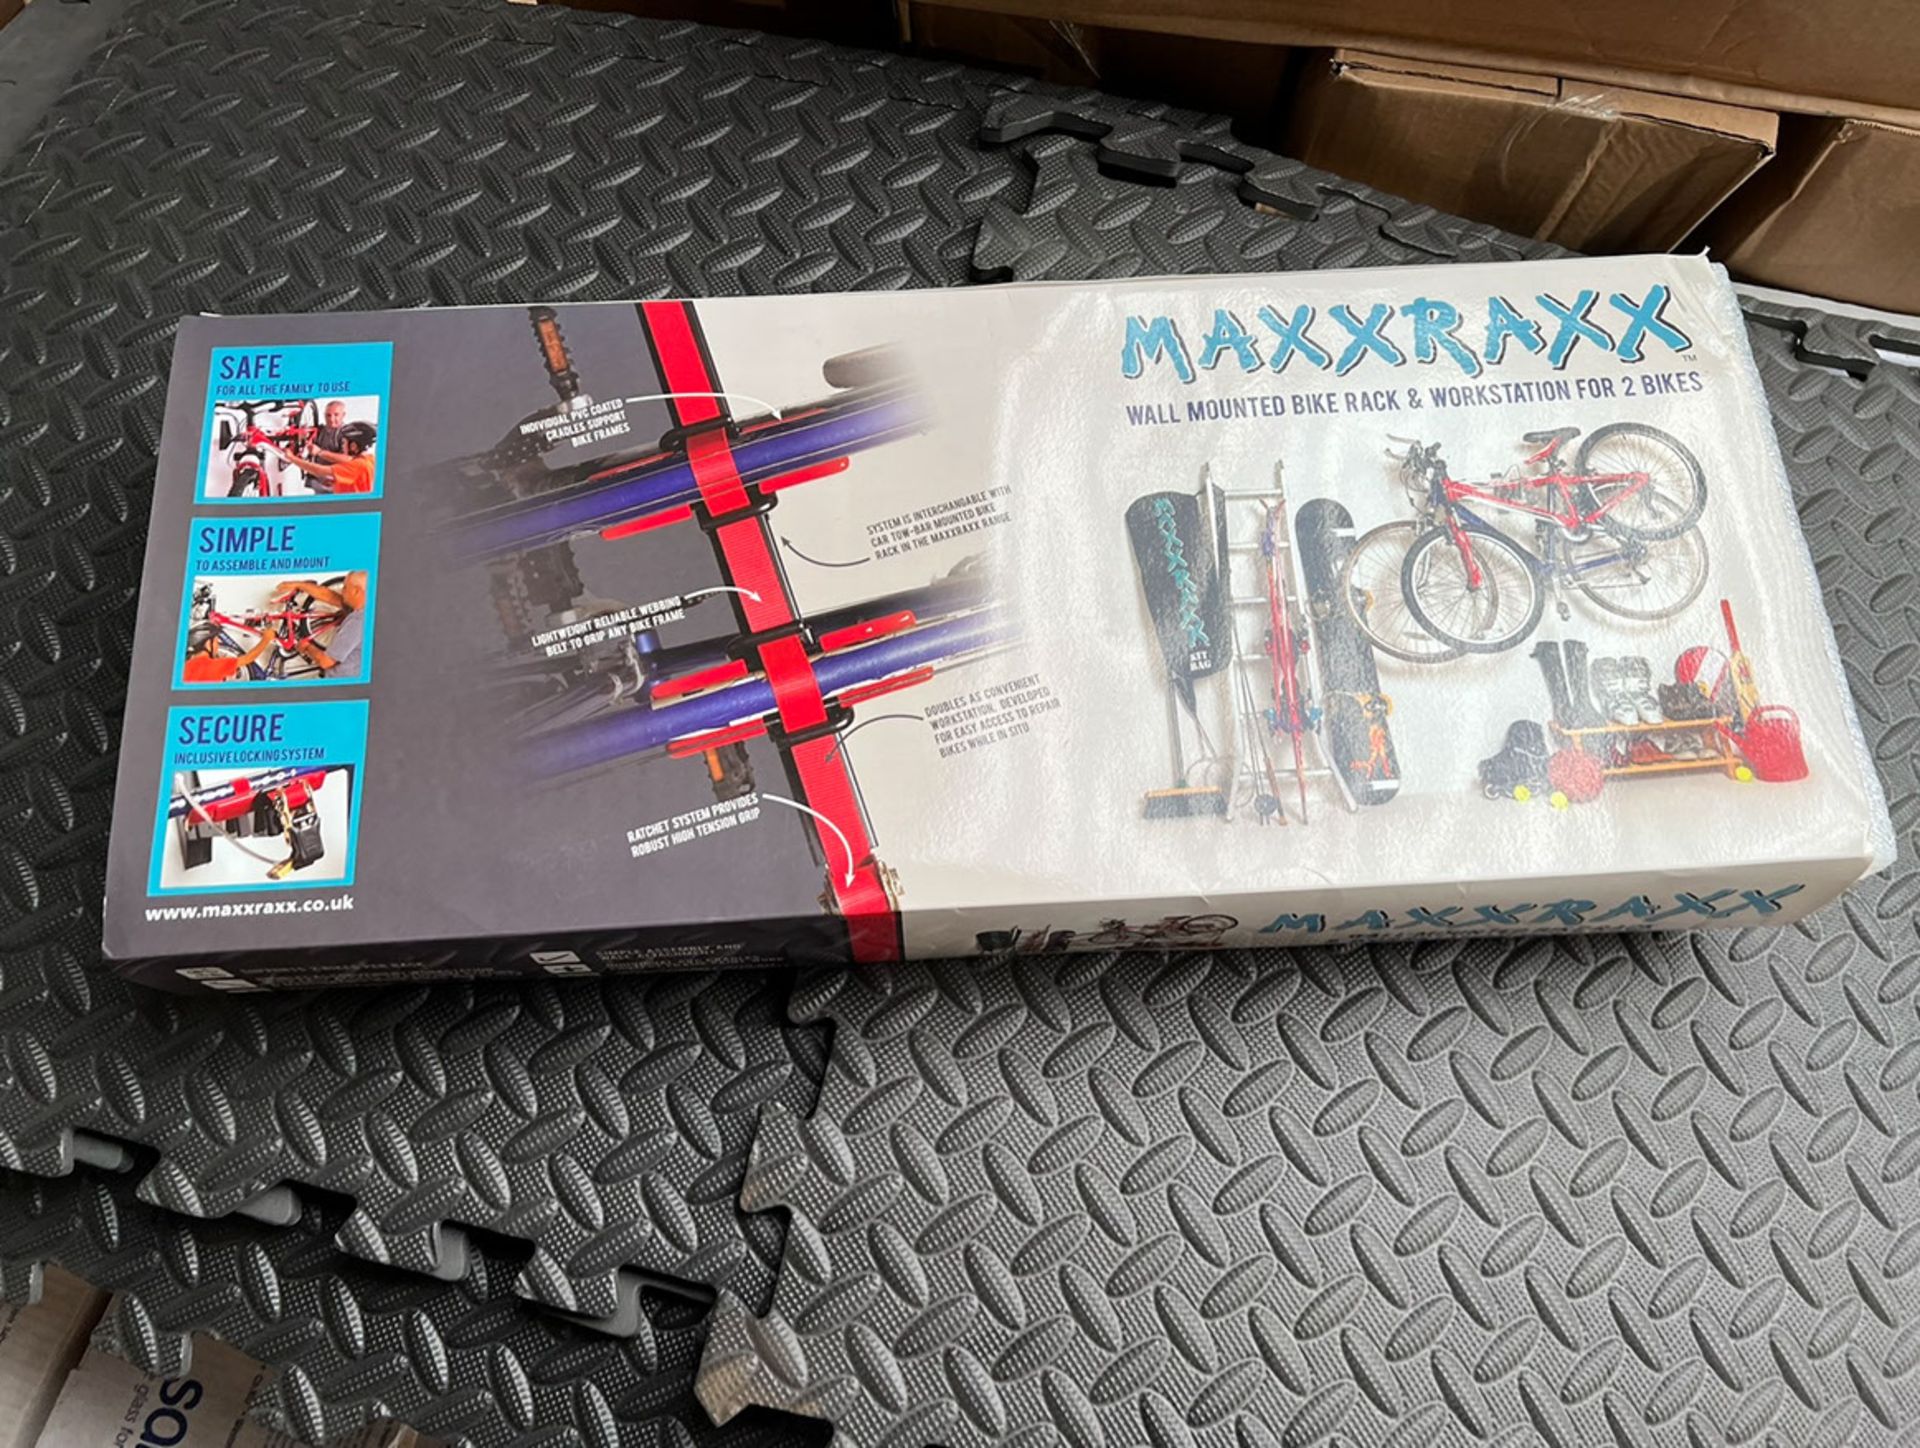 Maxxraxx Wall Mounted Bike Rack and Workstation for 2 Bikes - Image 2 of 3